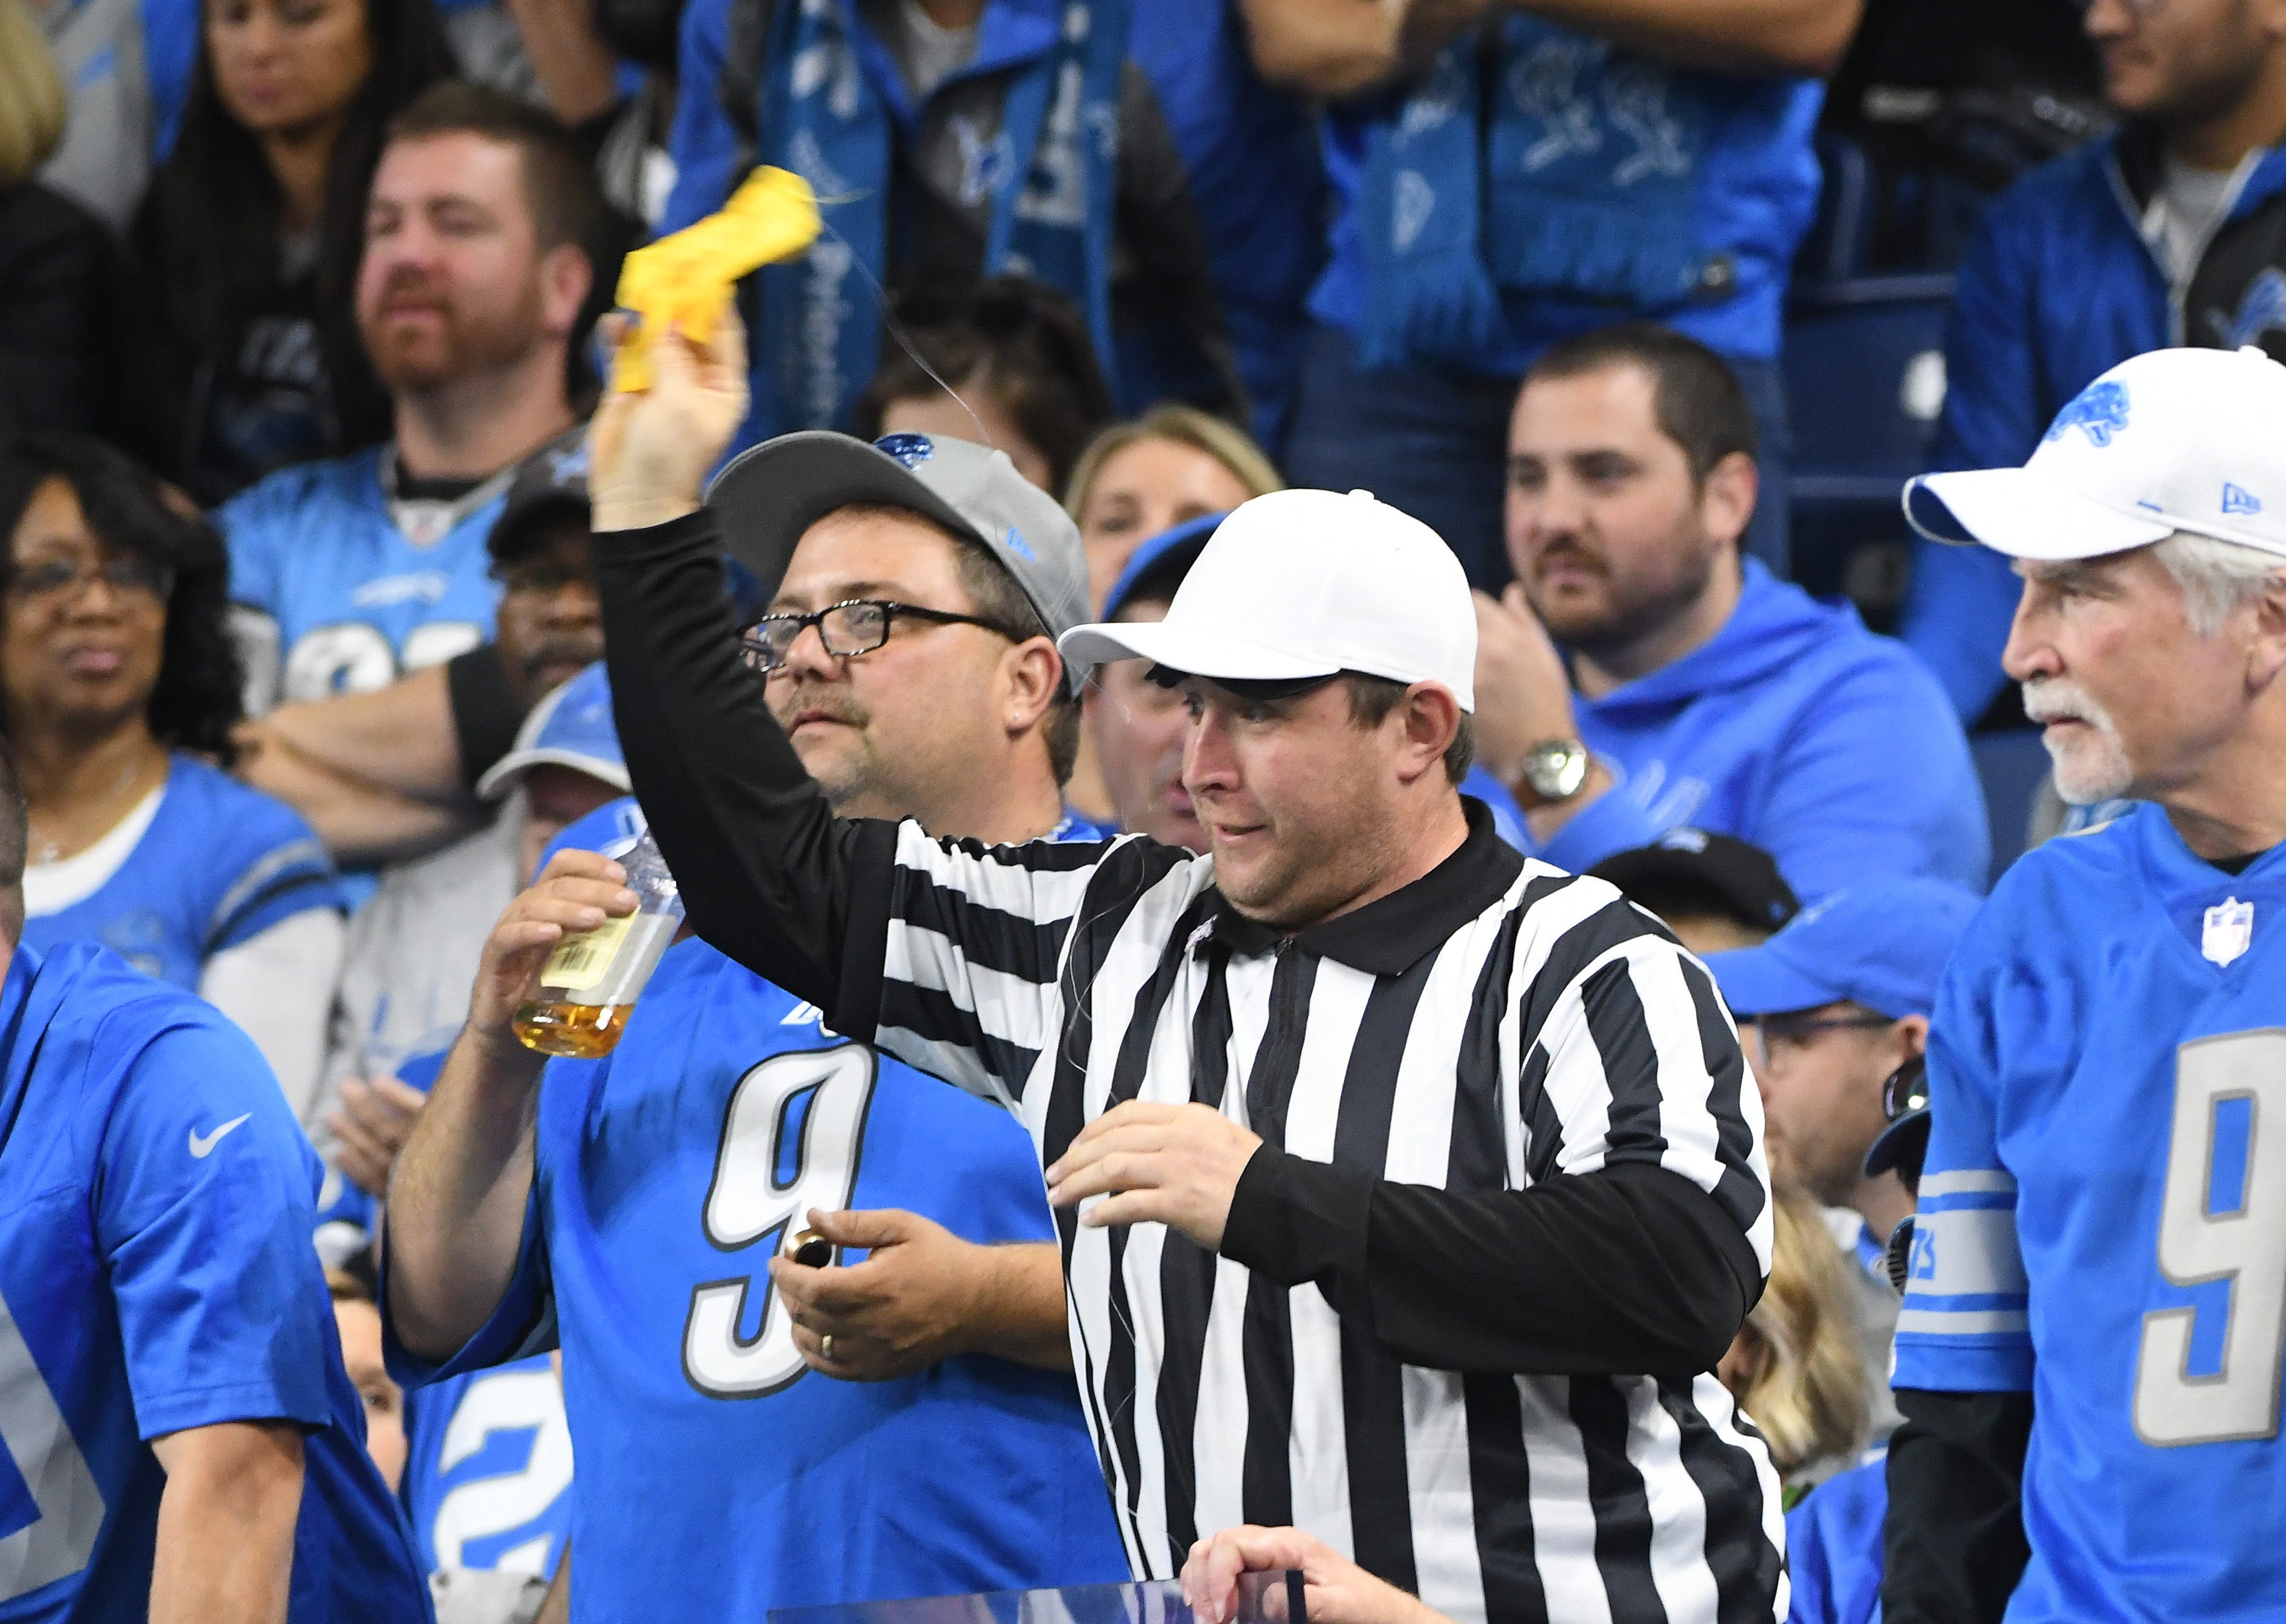 A fan in the stands dressed as a referee throws the yellow flag. But unlike real officials, he has a string attached so that he can pull it back off the field.